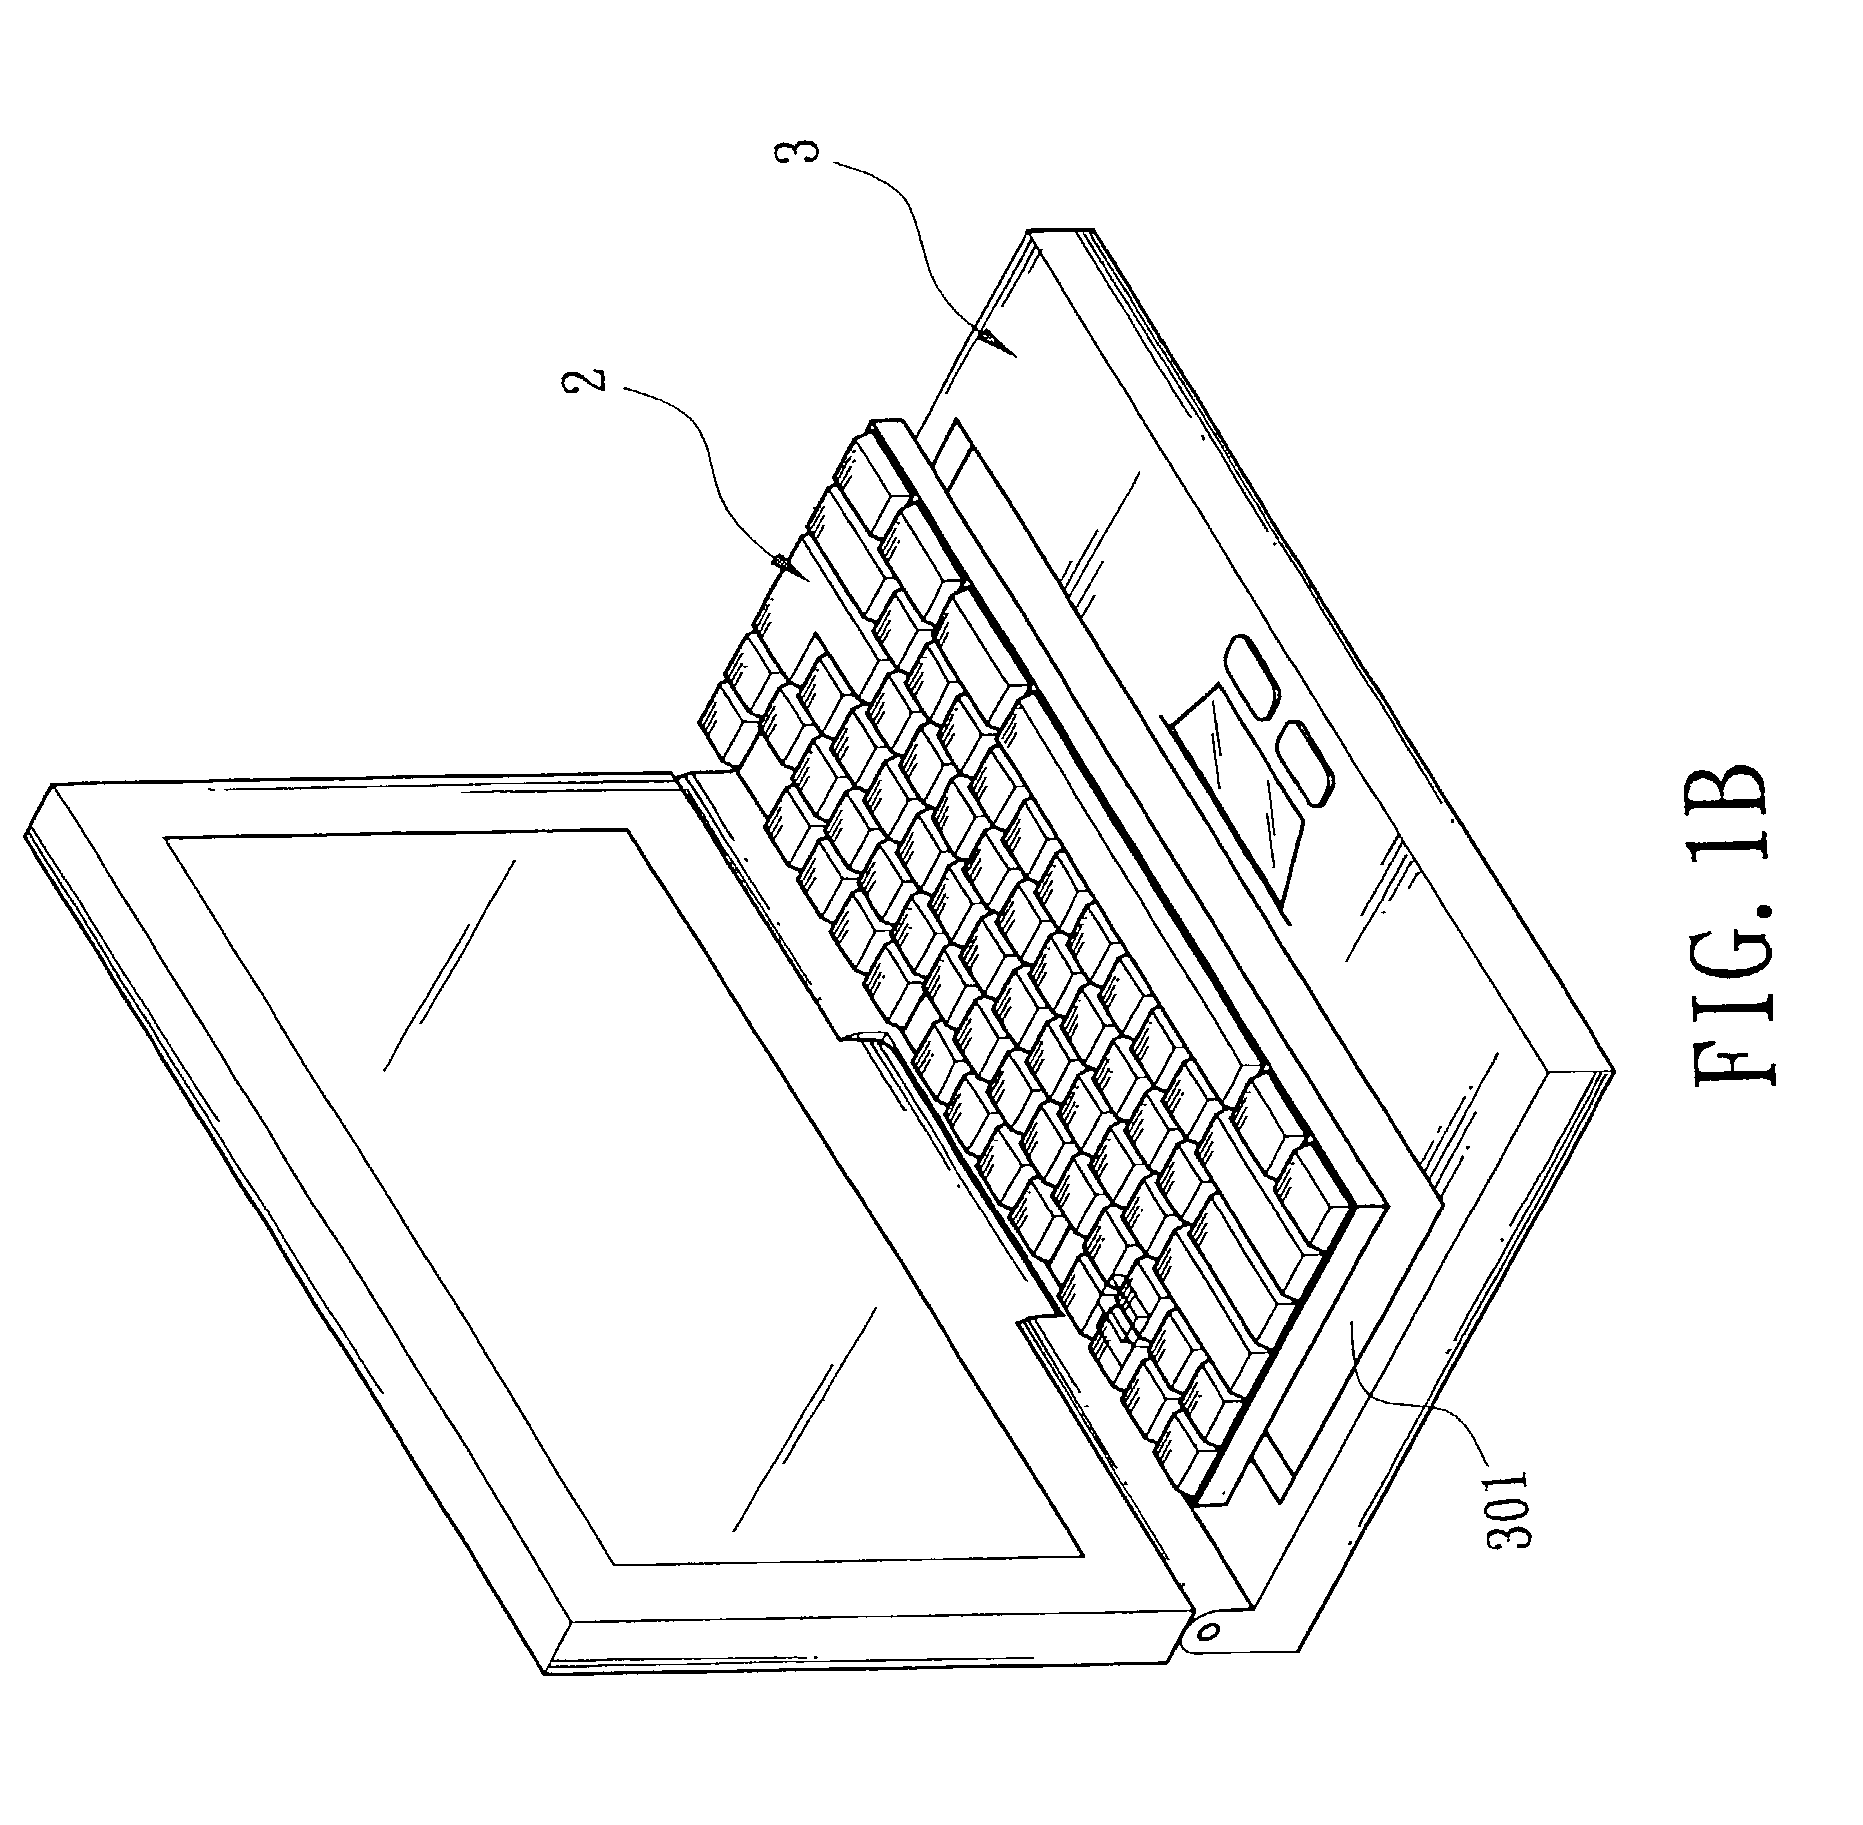 Notebook computer with a detachable keyboard